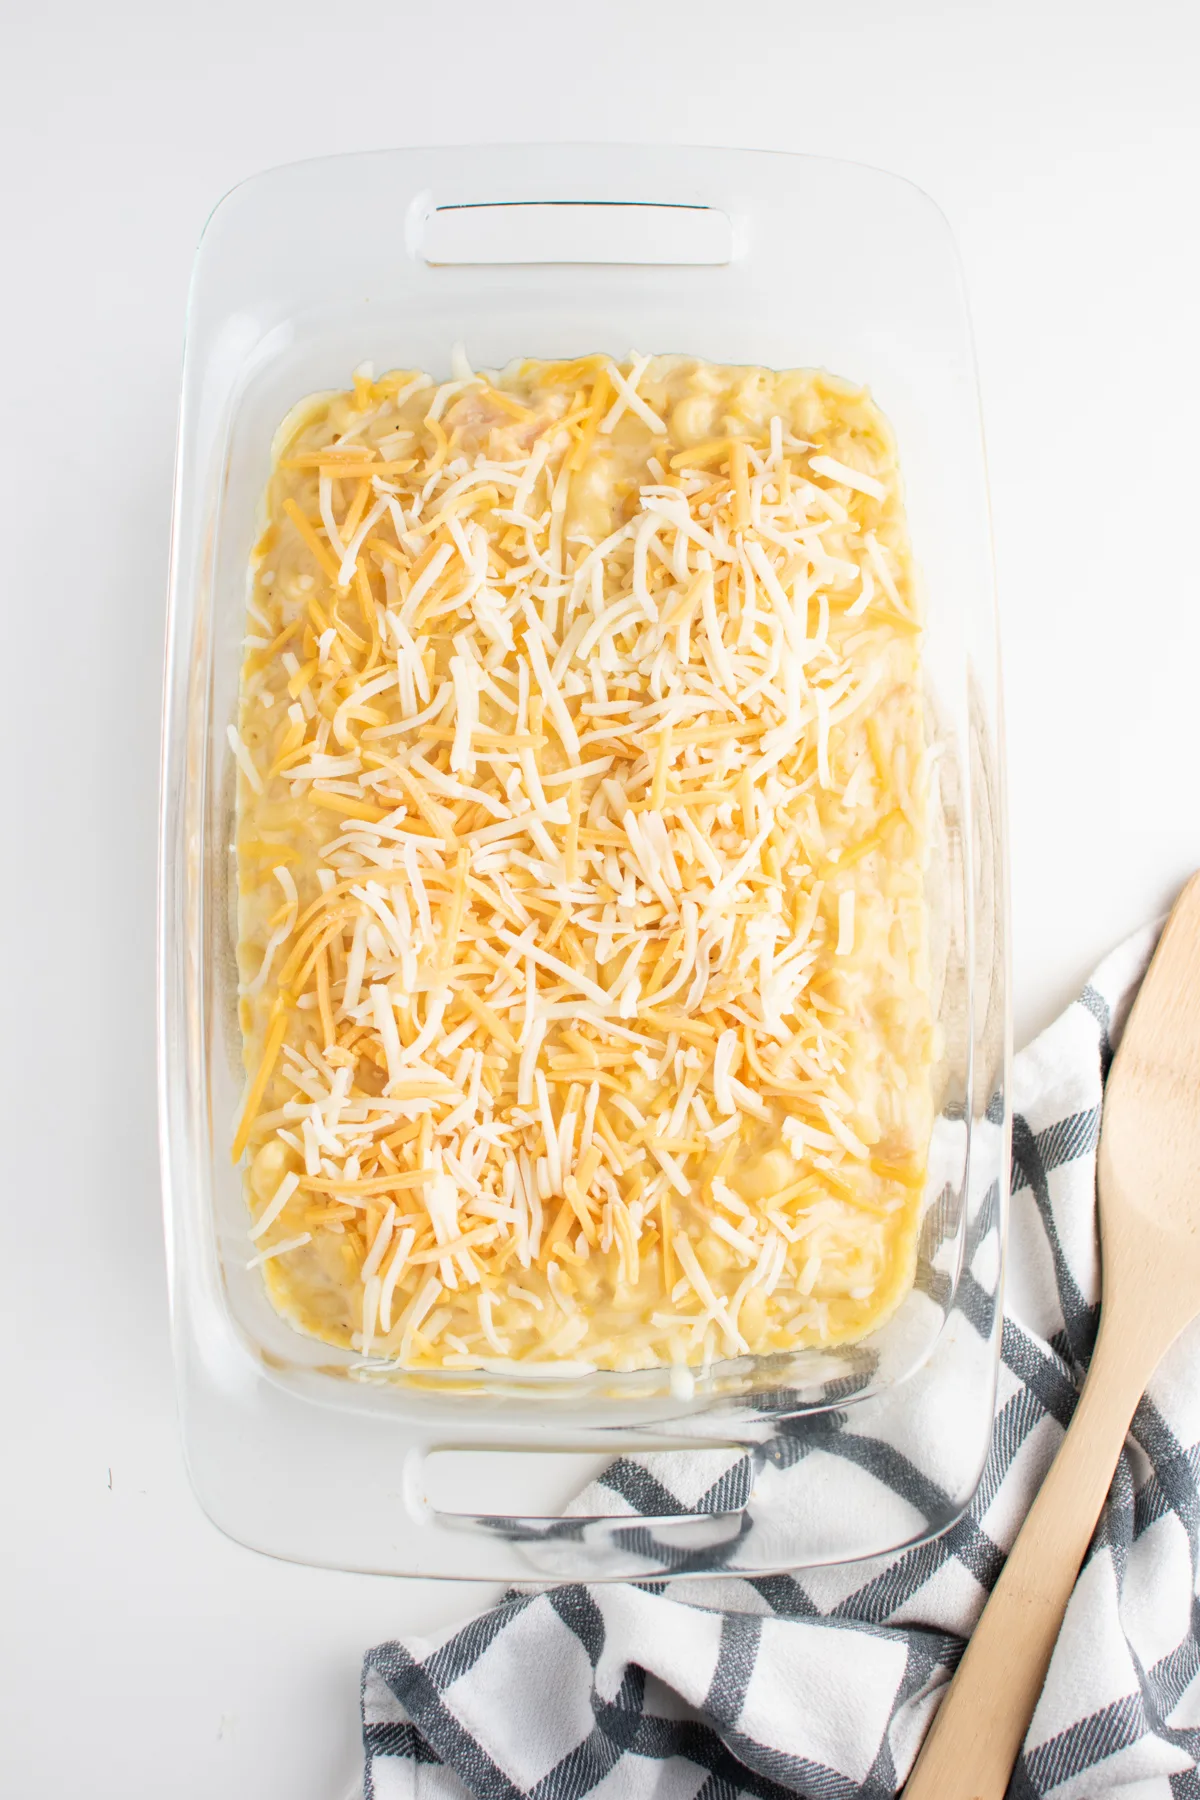 Shredded cheese on top of baked macaroni in clear casserole baking dish.